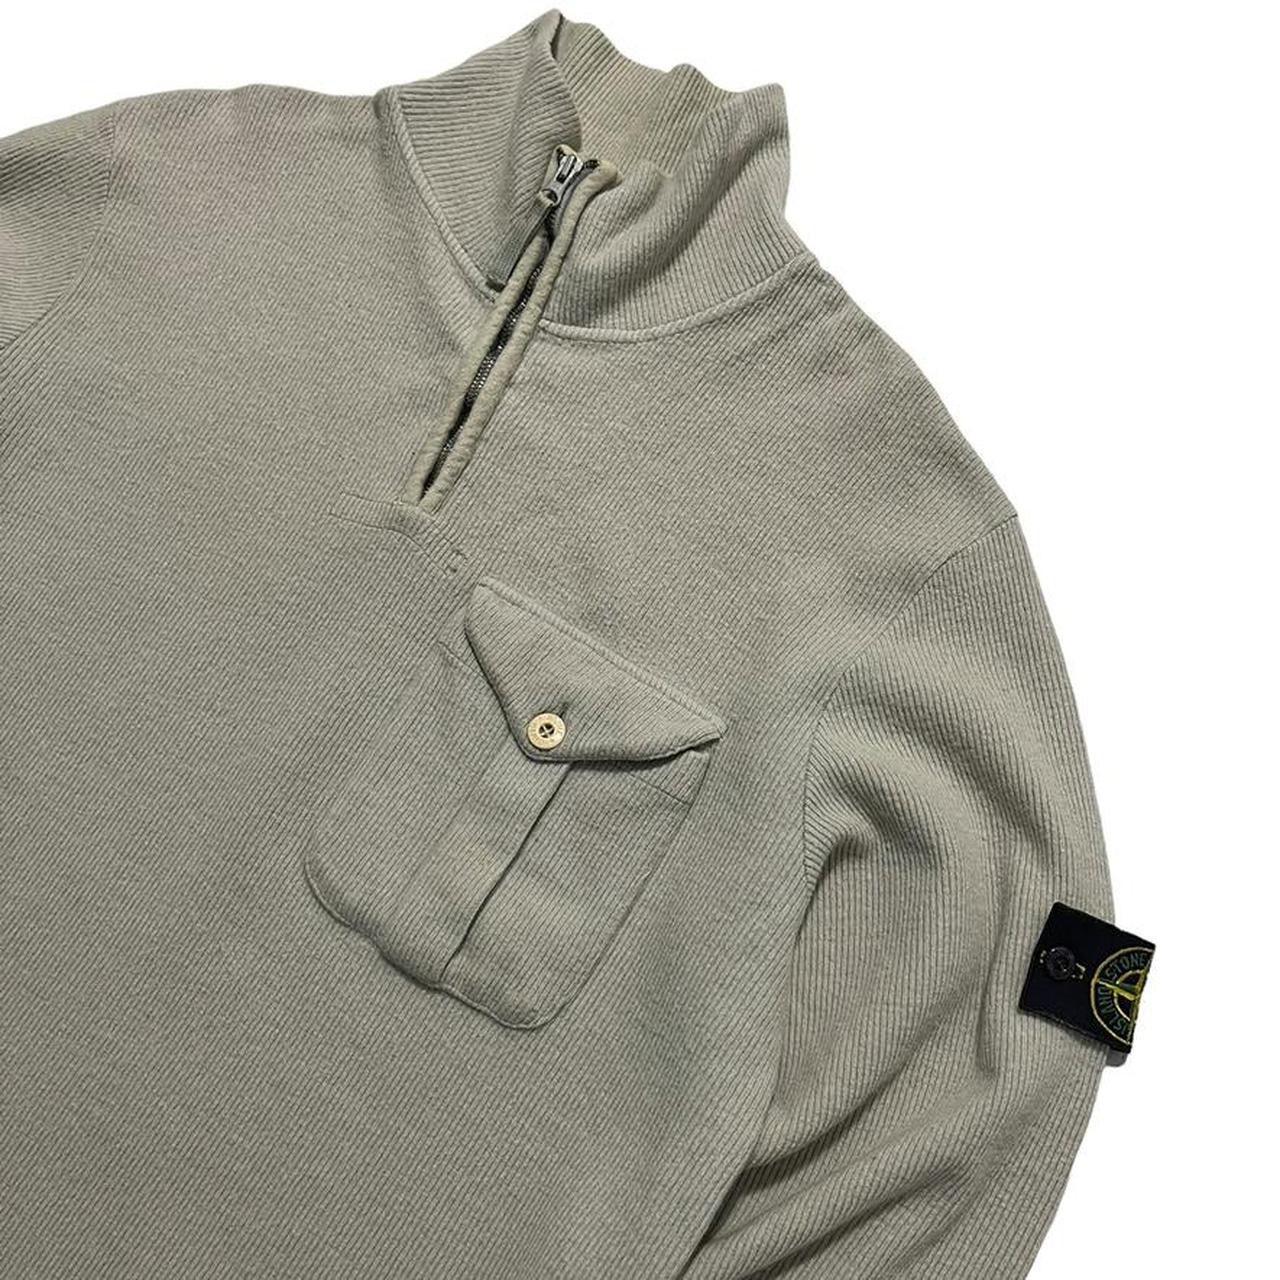 Stone Island A/W 2001 Ribbed Cotton Quarter Zip - Known Source